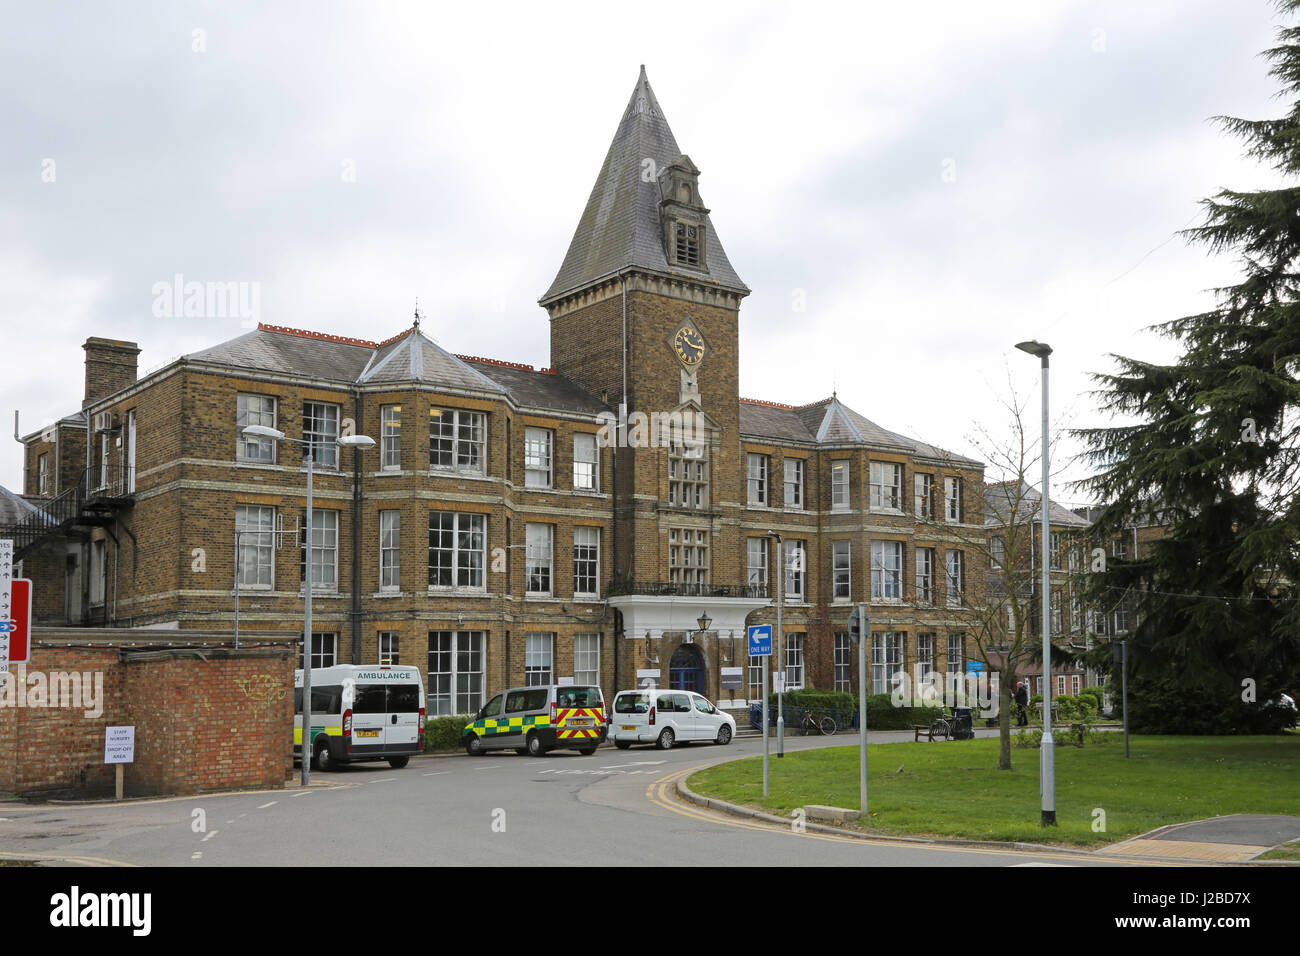 Main entrance to Chase Farm Hospital in Enfield, north London, UK. This original Victorian structure has been largely replaced by new buildings. Stock Photo